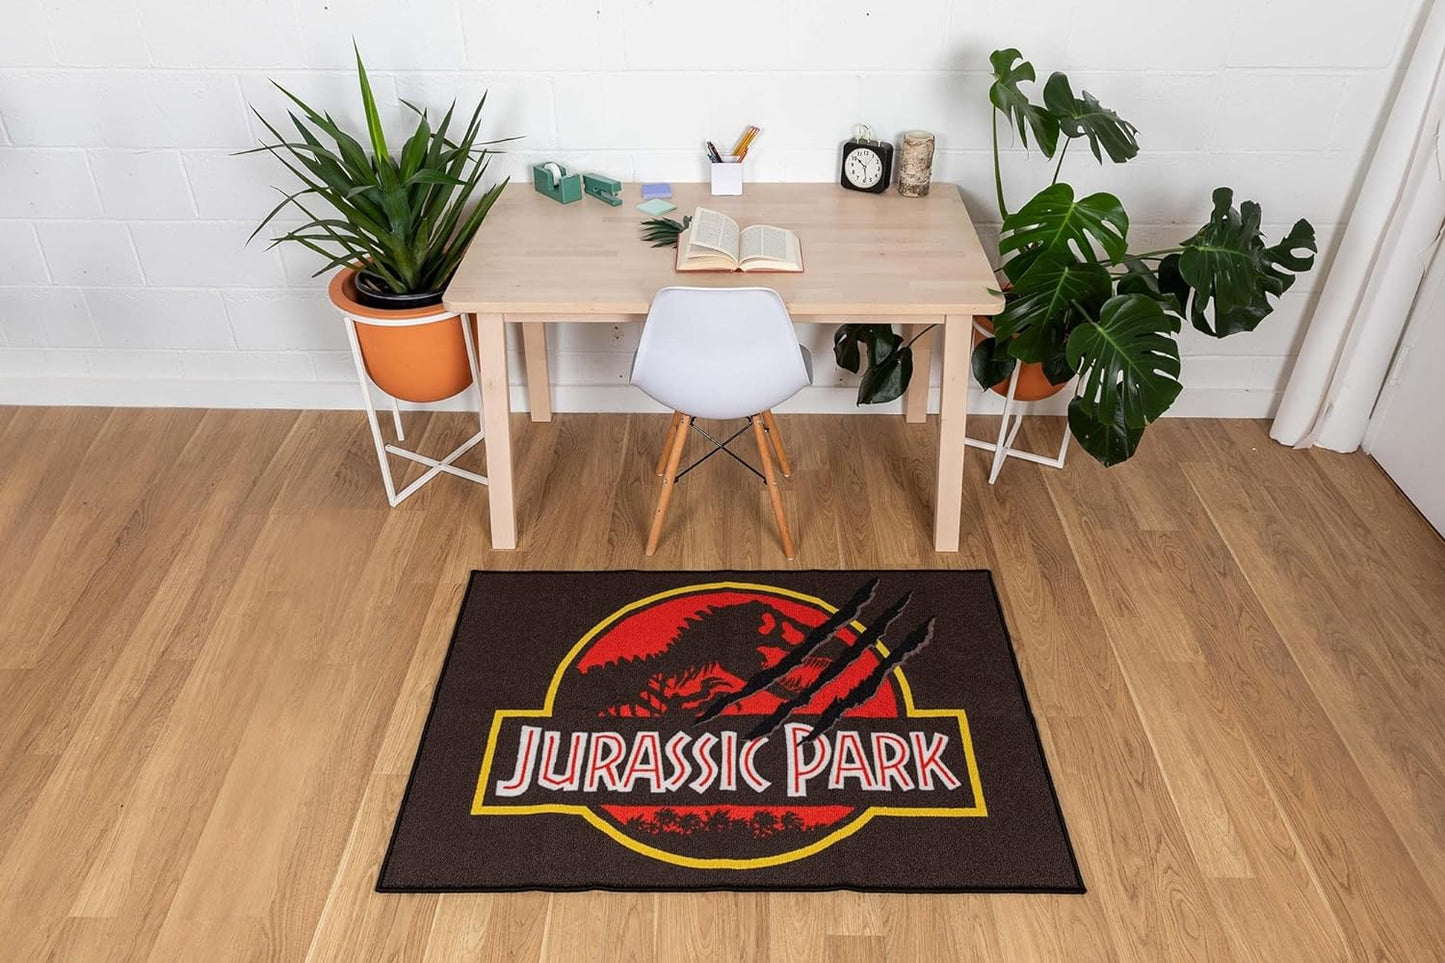 JURASSIC PARK LOGO PRINTED AREA RUG 52 X 36 INCHES